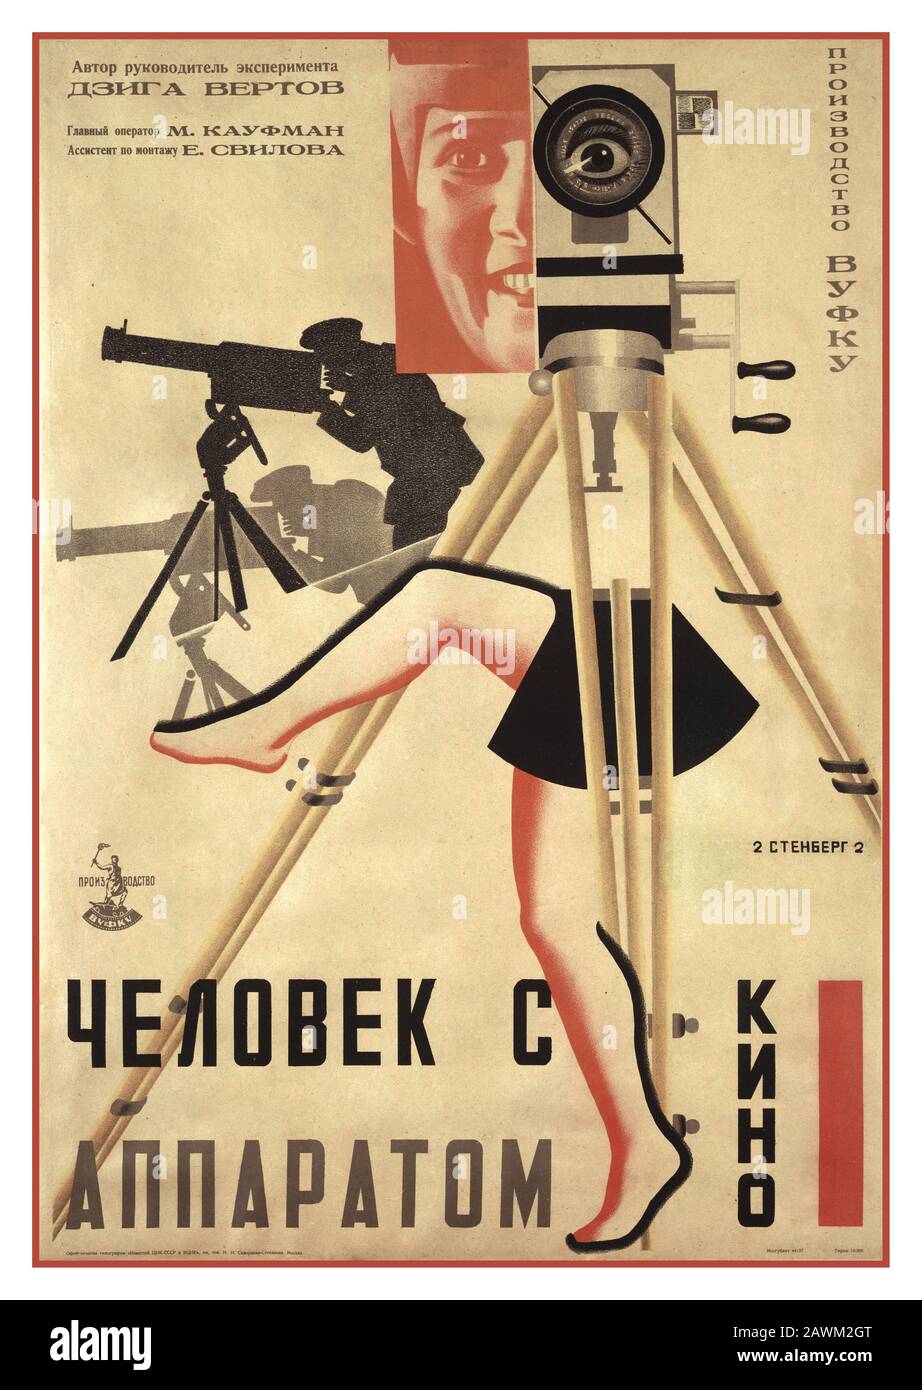 Vintage 1920's Russian Film Poster Chelovek's Kinoapparatom 'Man with a Movie Camera' an experimental 1929 Soviet silent documentary film, directed by Dziga Vertov and edited by his wife Elizaveta Svilova. Vertov's feature film, produced by the film studio VUFKU, presents urban life in the Soviet cities of Kiev, Kharkov, Moscow and Odessa. Stenberg, (Artist), Russian, 1899-1982 Georgii Stenberg, (Artist), Russian, 1900-1933 Title Chelovek’s Kinoapparatom (The Man with the Movie Camera) Graphic Design 1929 Lithograph Stock Photo